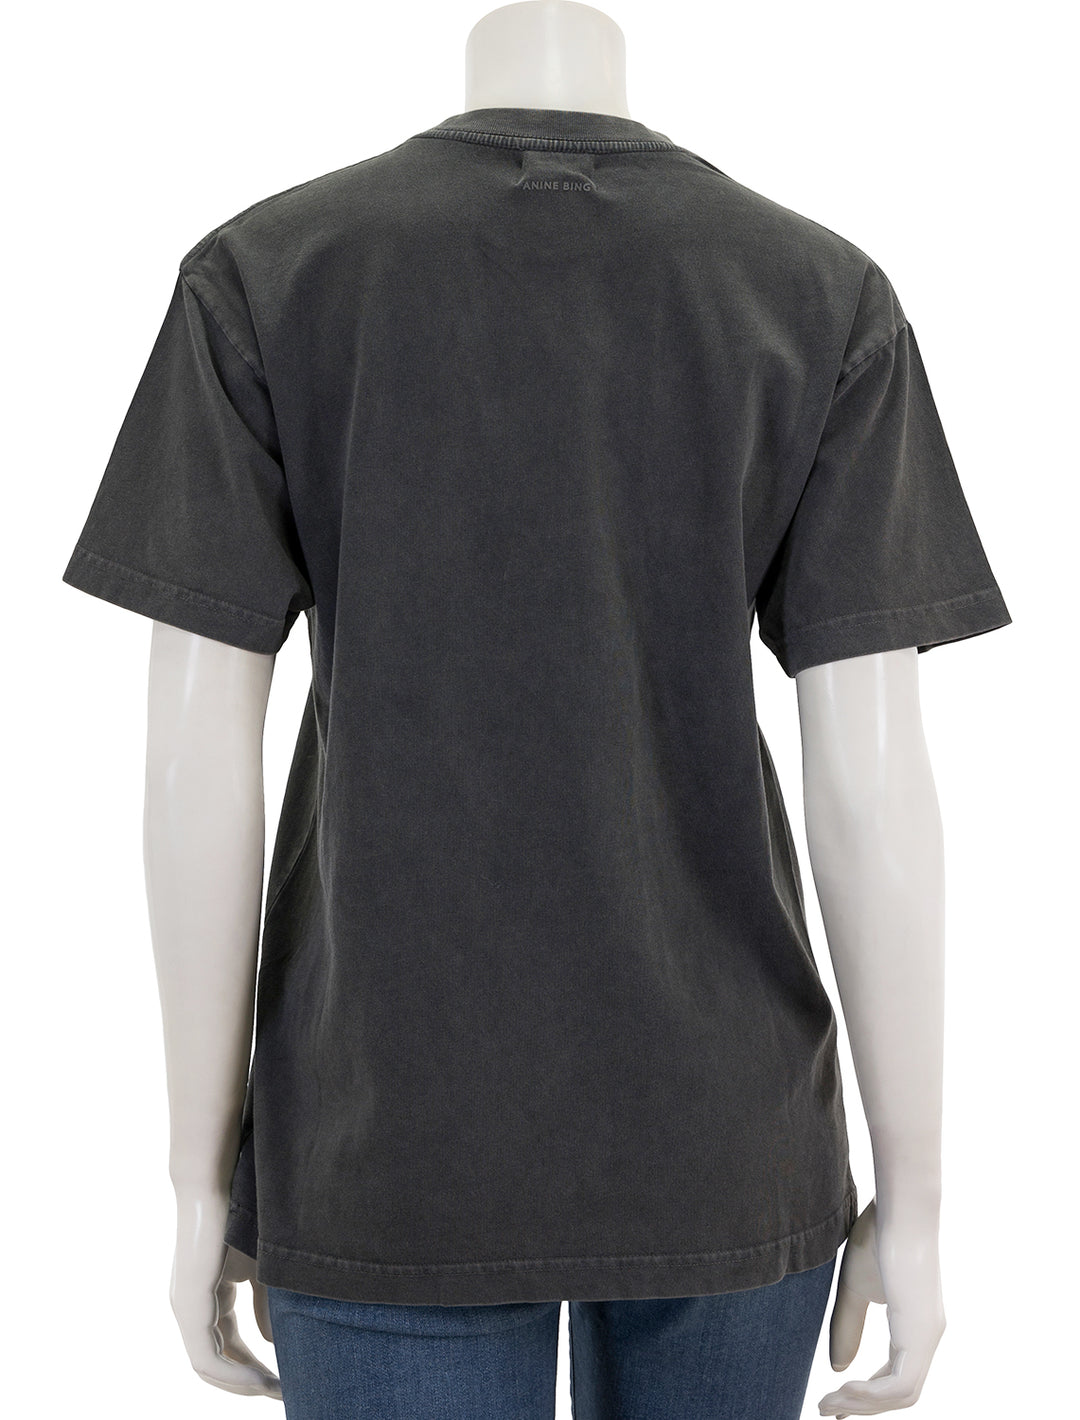 Back view of Anine Bing's bing bolt tee in black.